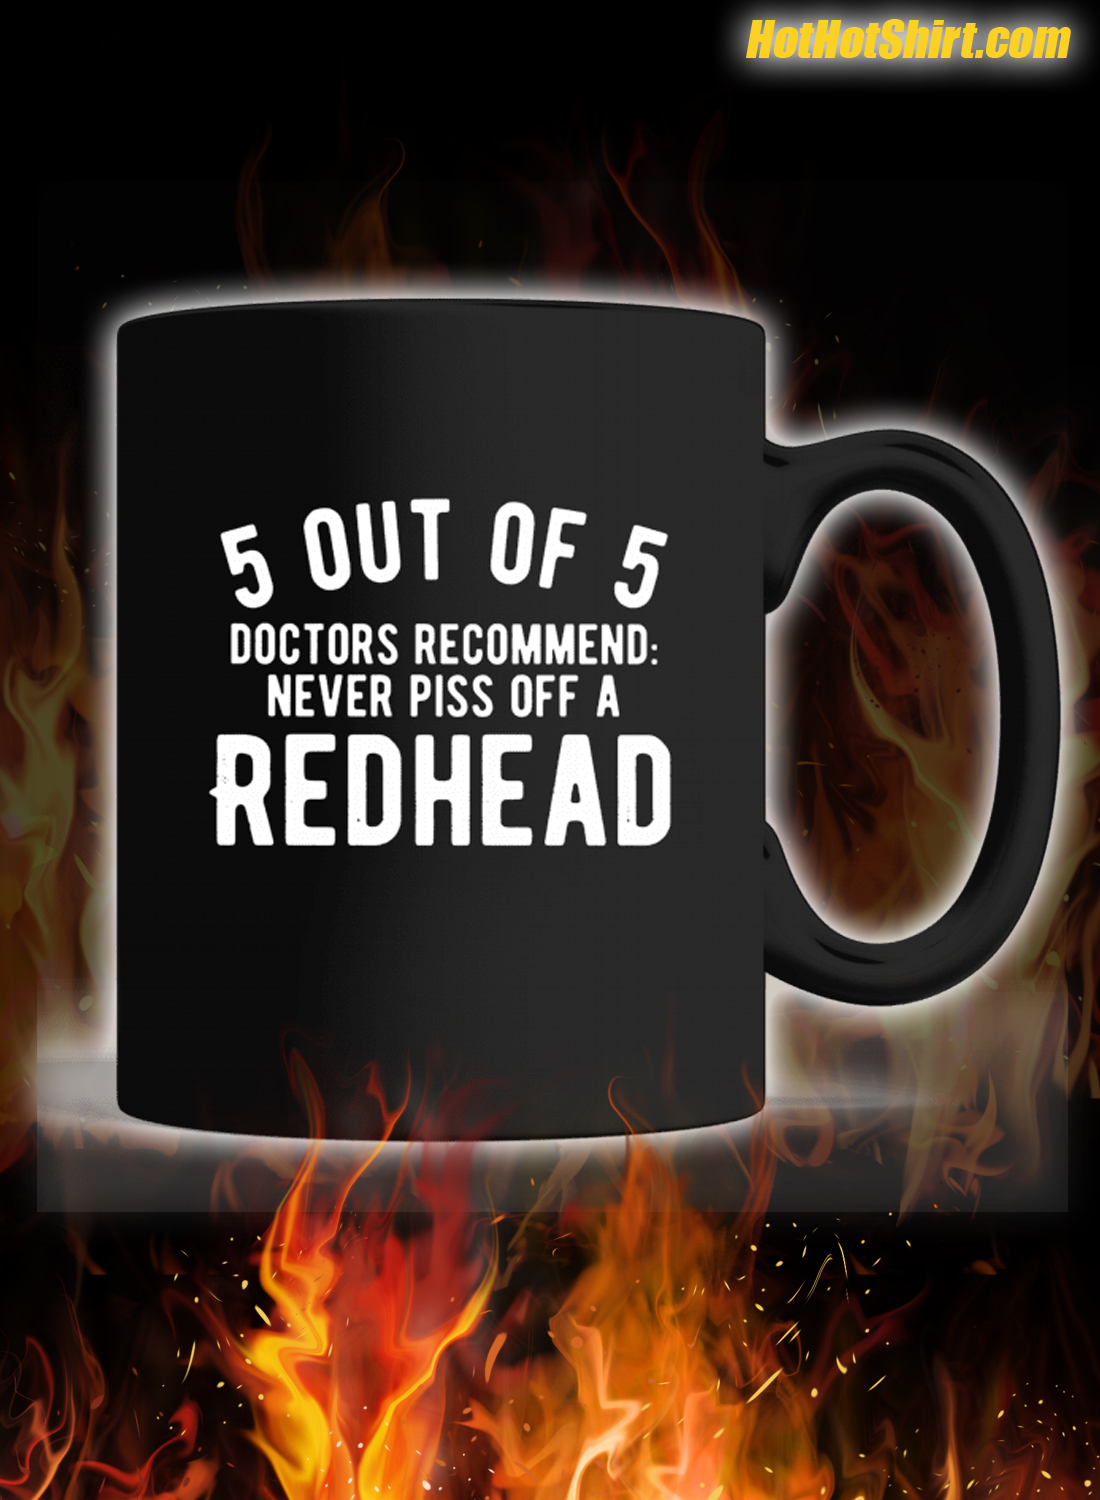 5 Out Of 5 Doctors Recommend Never Piss Off A Redhead Mug